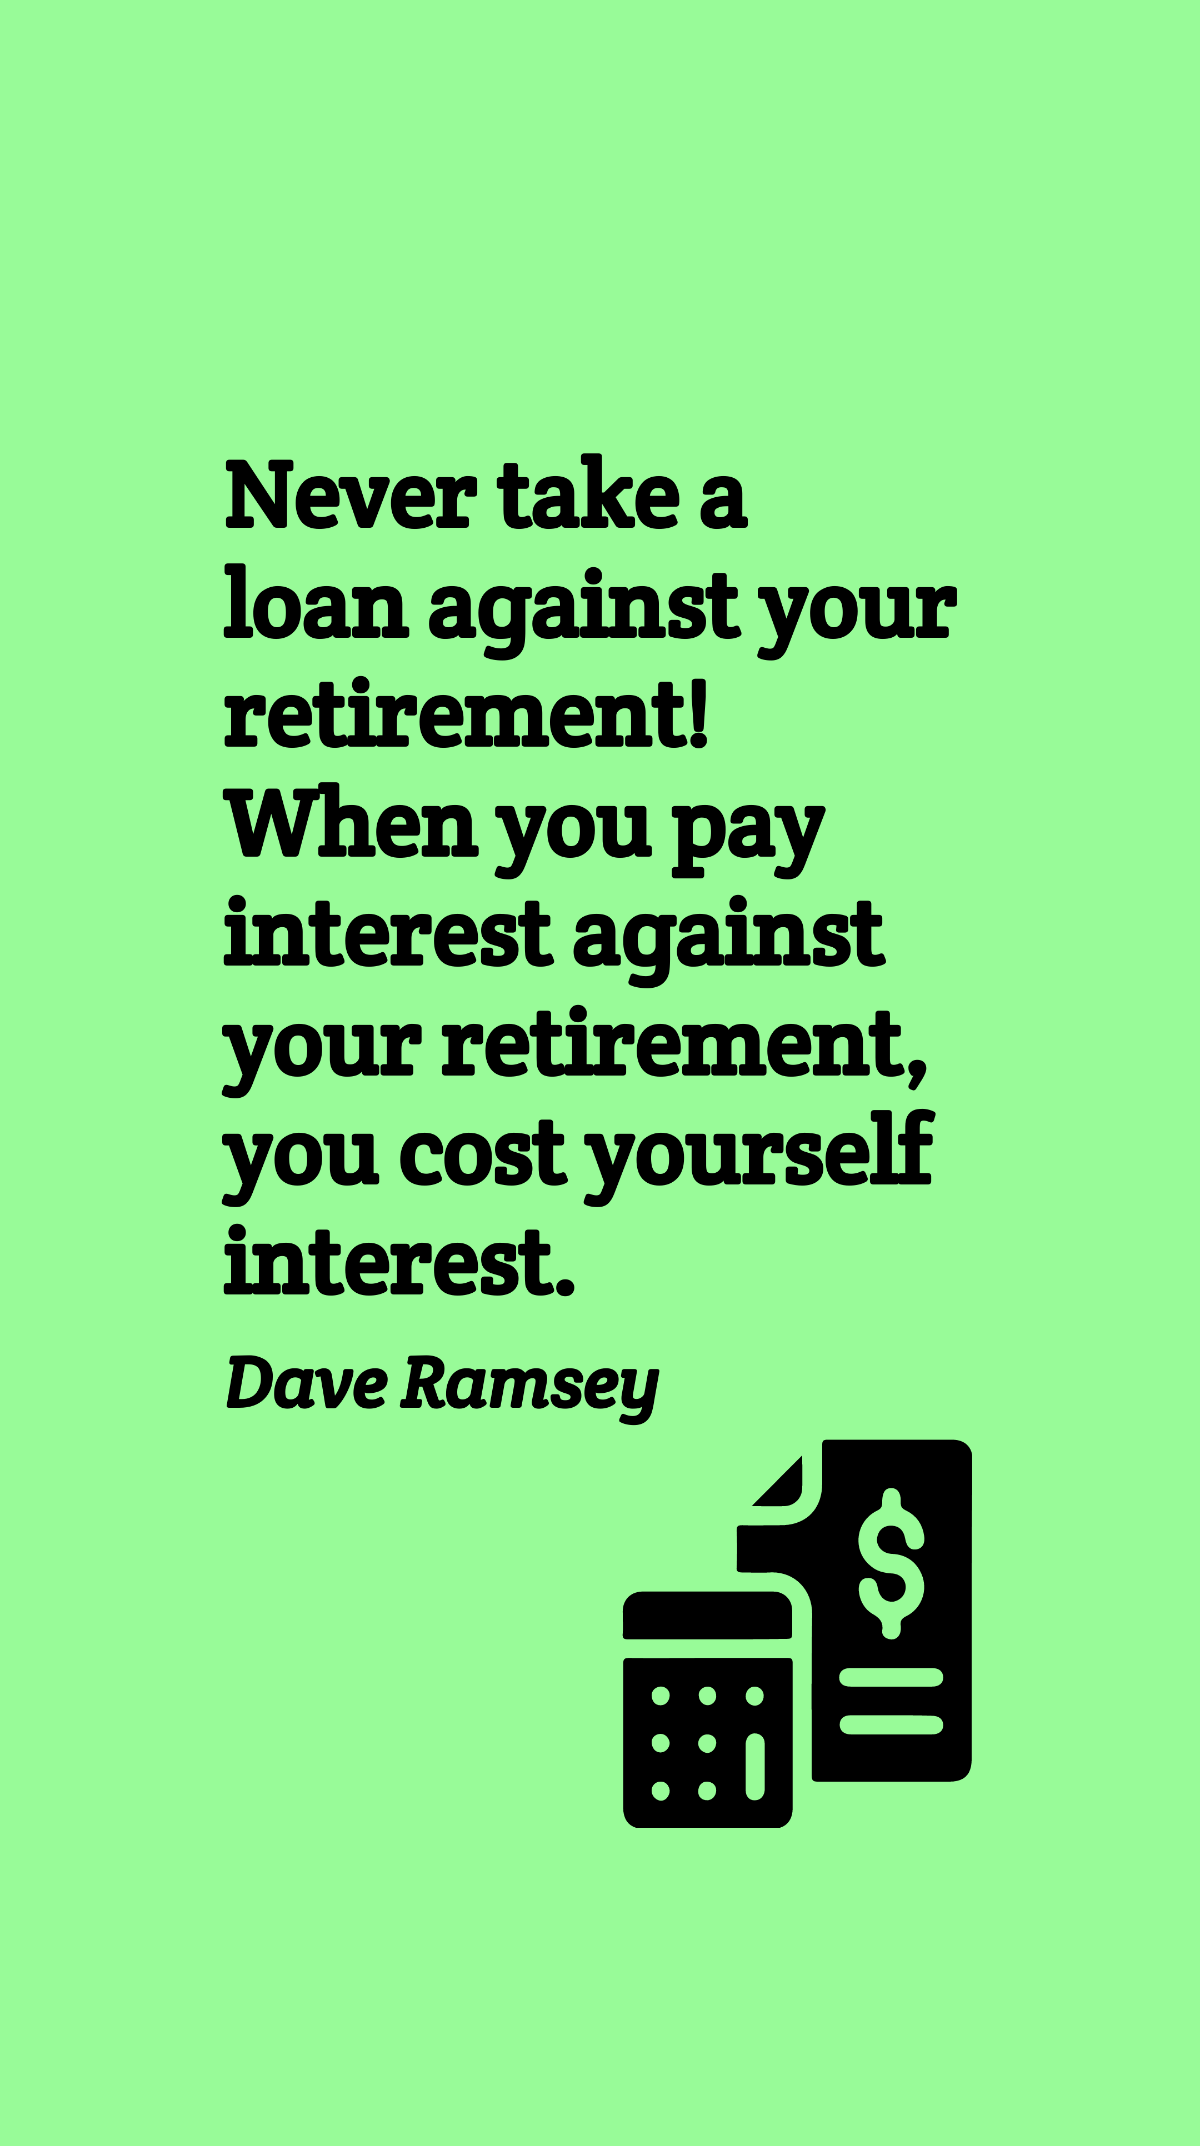 Dave Ramsey - Never take a loan against your retirement! When you pay interest against your retirement, you cost yourself interest. Template